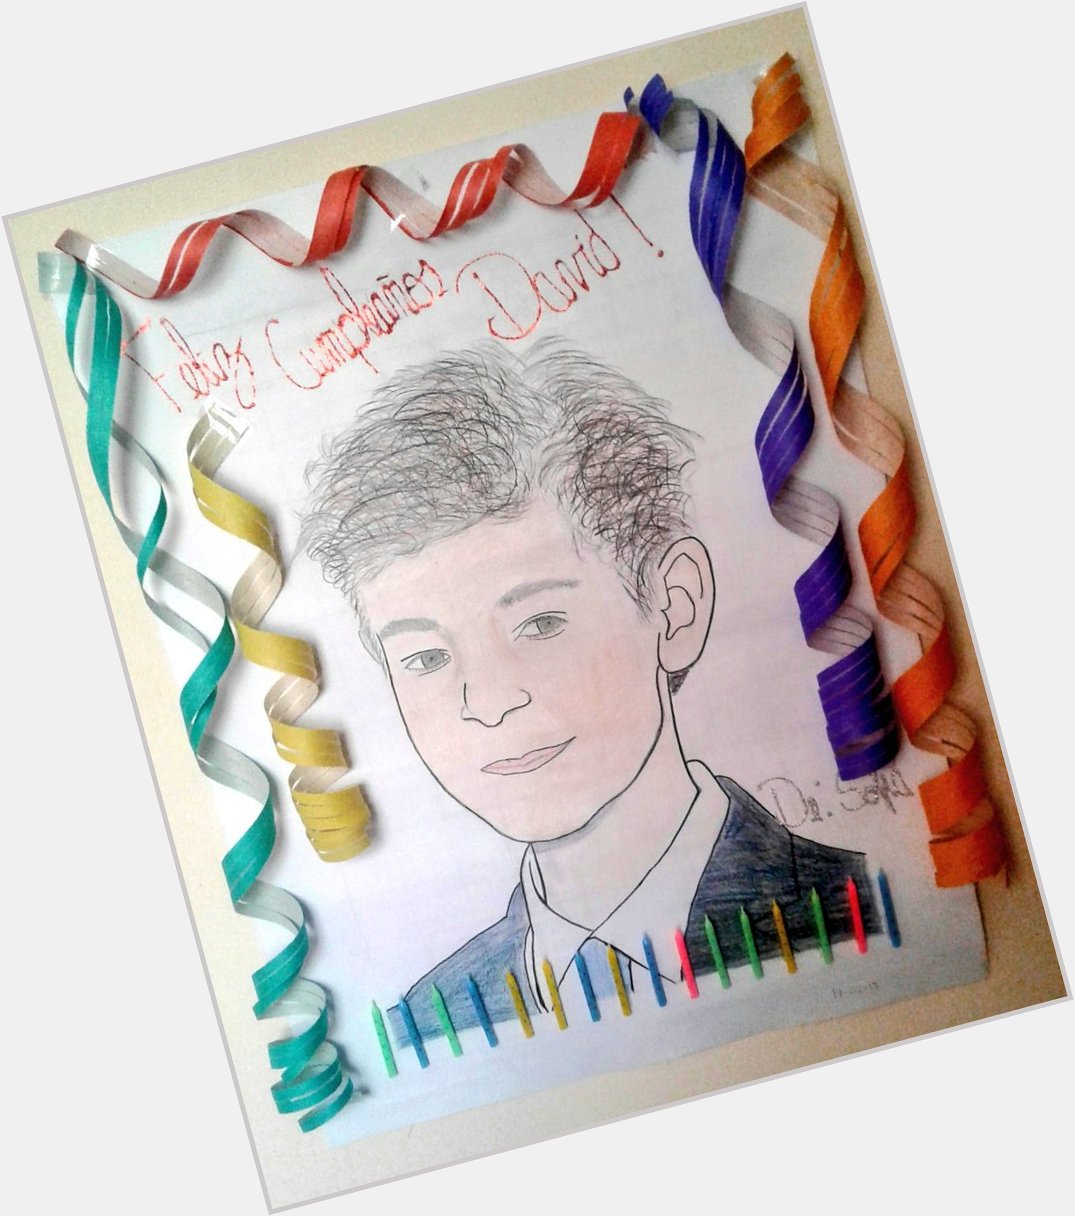 Happy birthday David Mazouz!!! I hope you have a fabulous day!! This is my gift for you.I did it with a lot of love. 